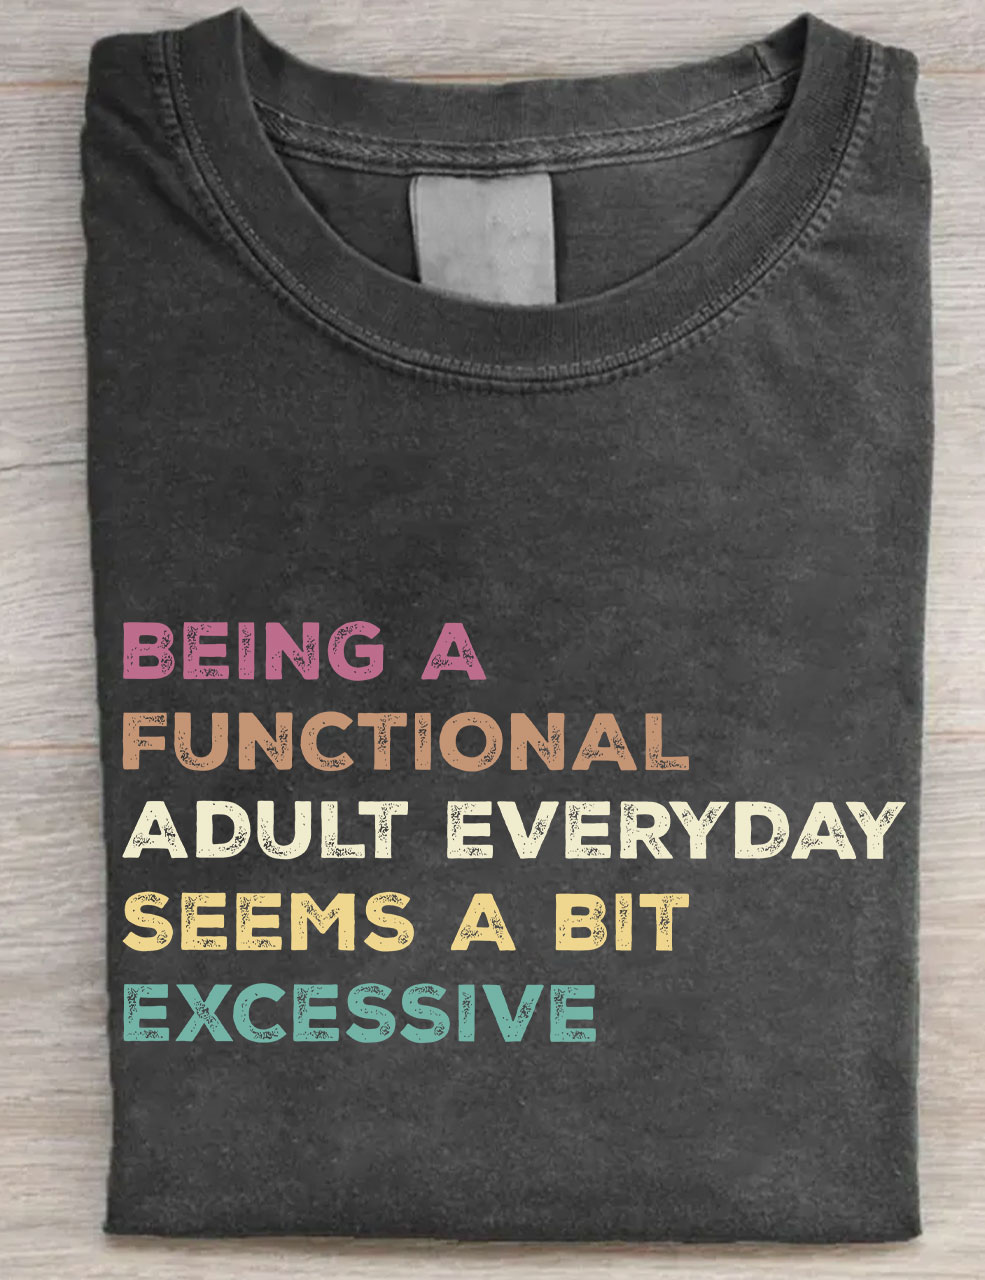 Being A Functional Adult Everyday Seems A Bit Excessive T-shirt